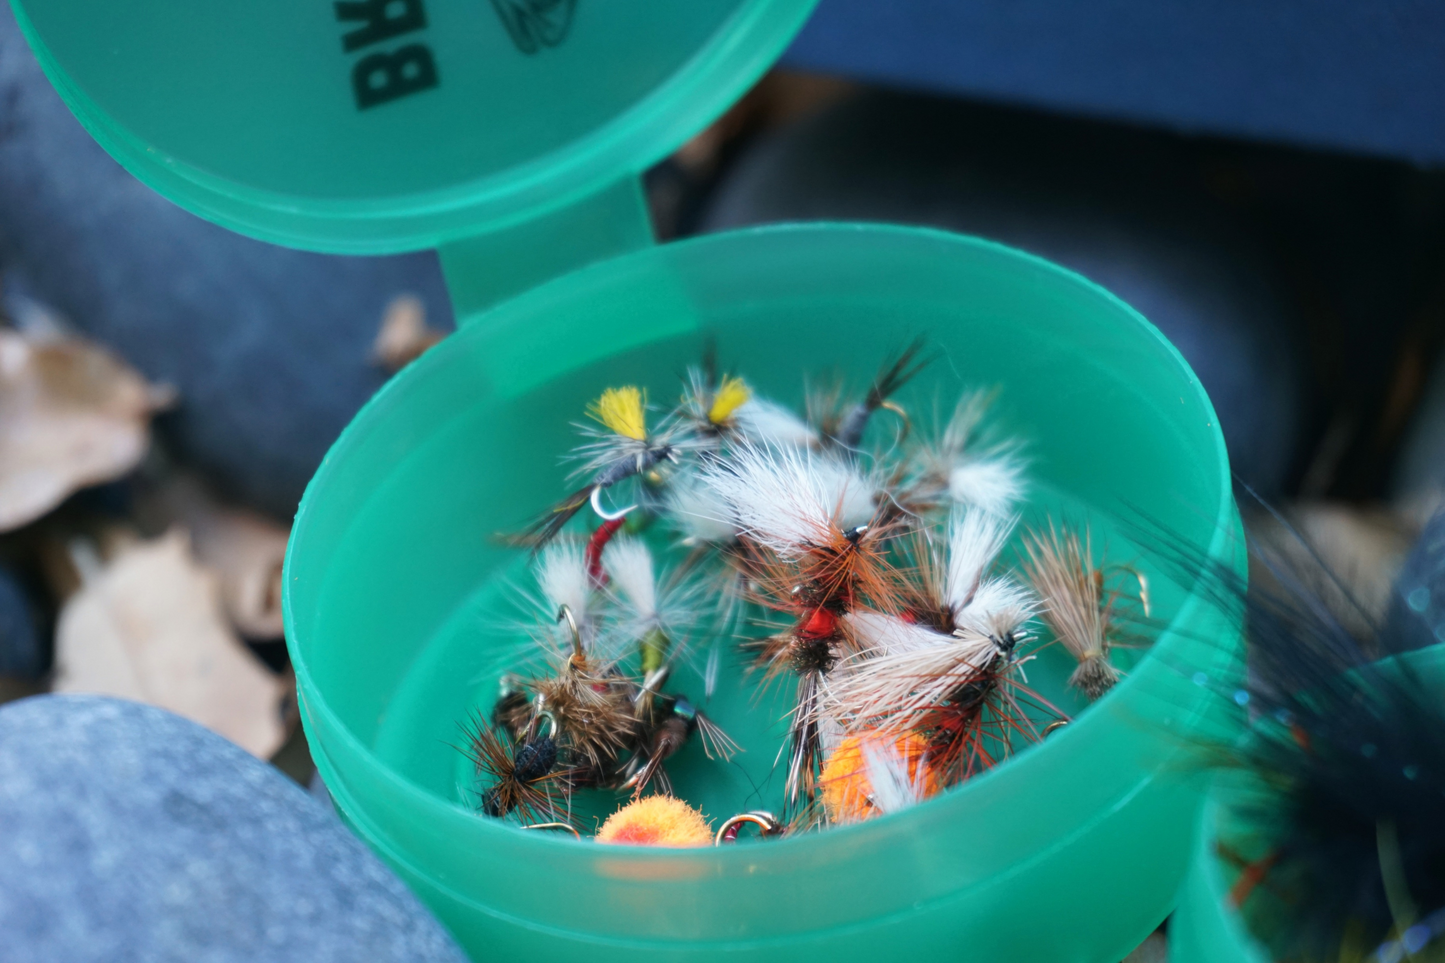 Guide’s Stash "Just the Flies" 48 Fly Box